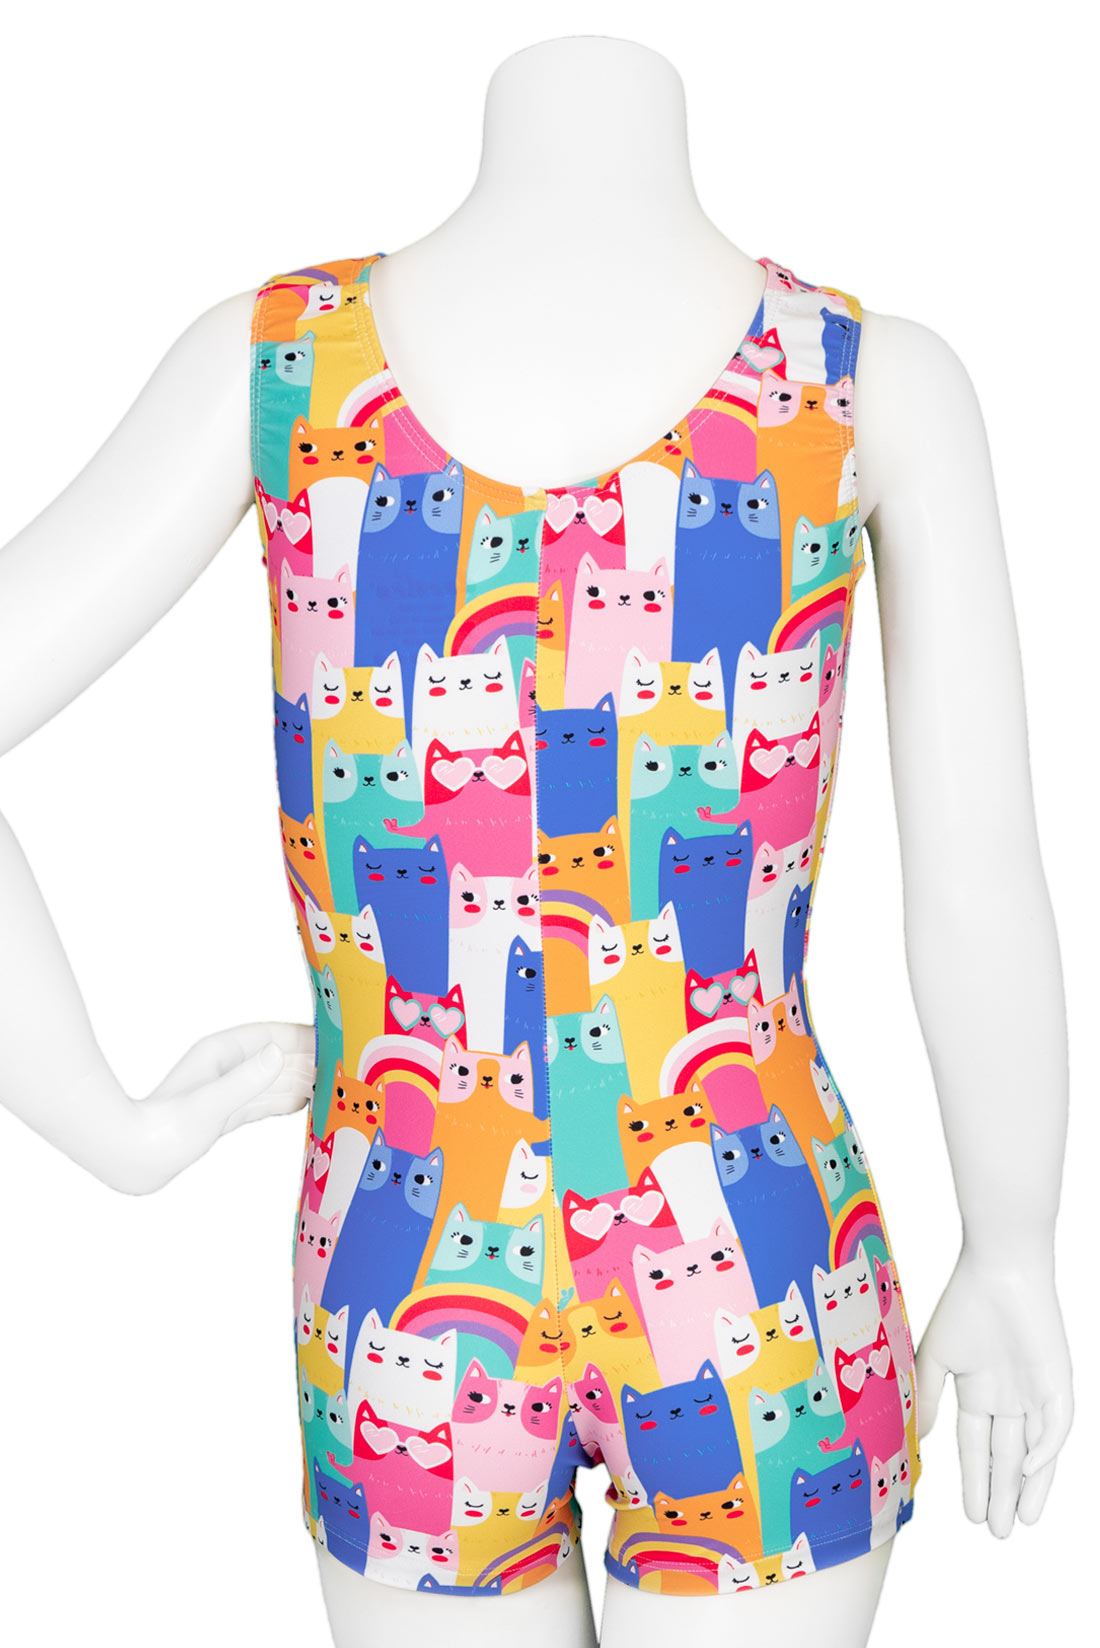 Cat-themed unitard for gymnasts by Destira, 2024